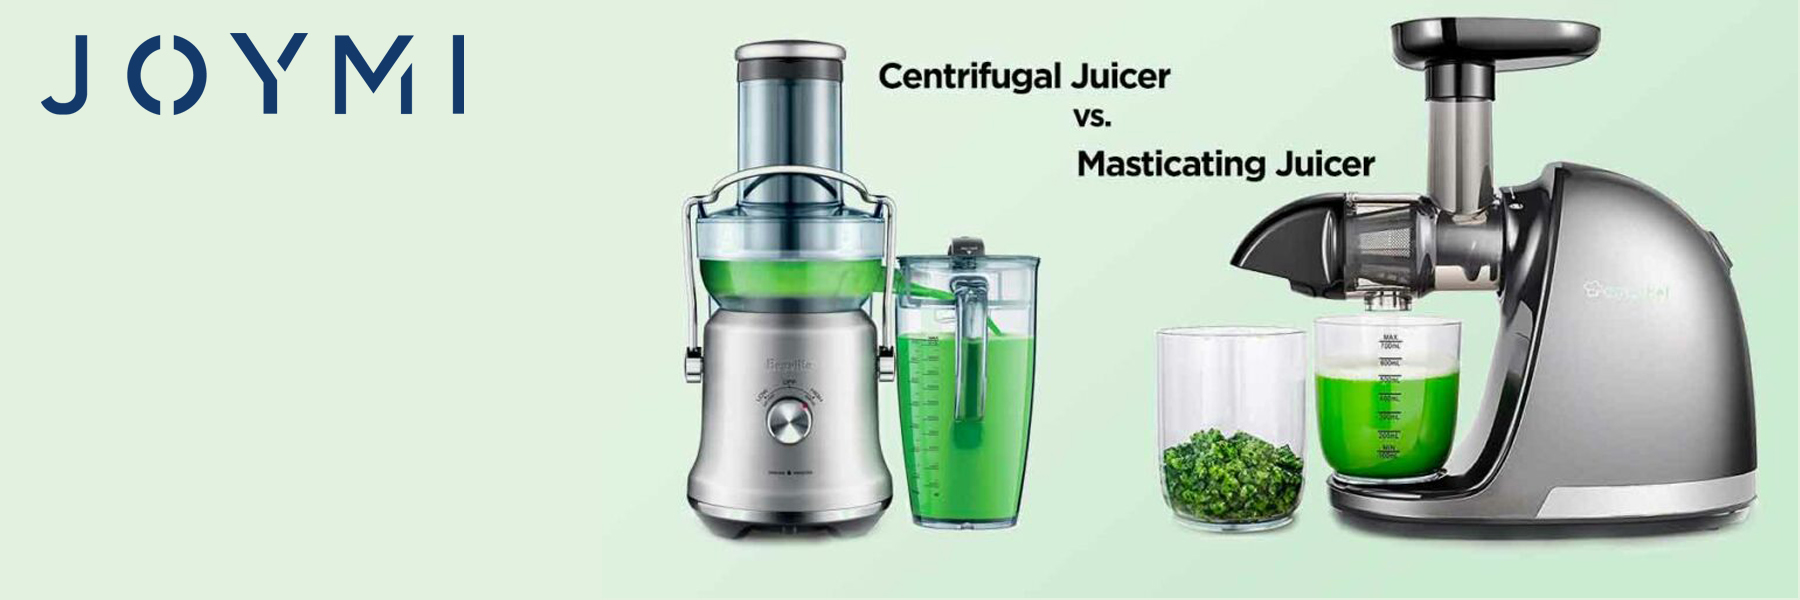 A Guide to Centrifugal and Masticating Juicers